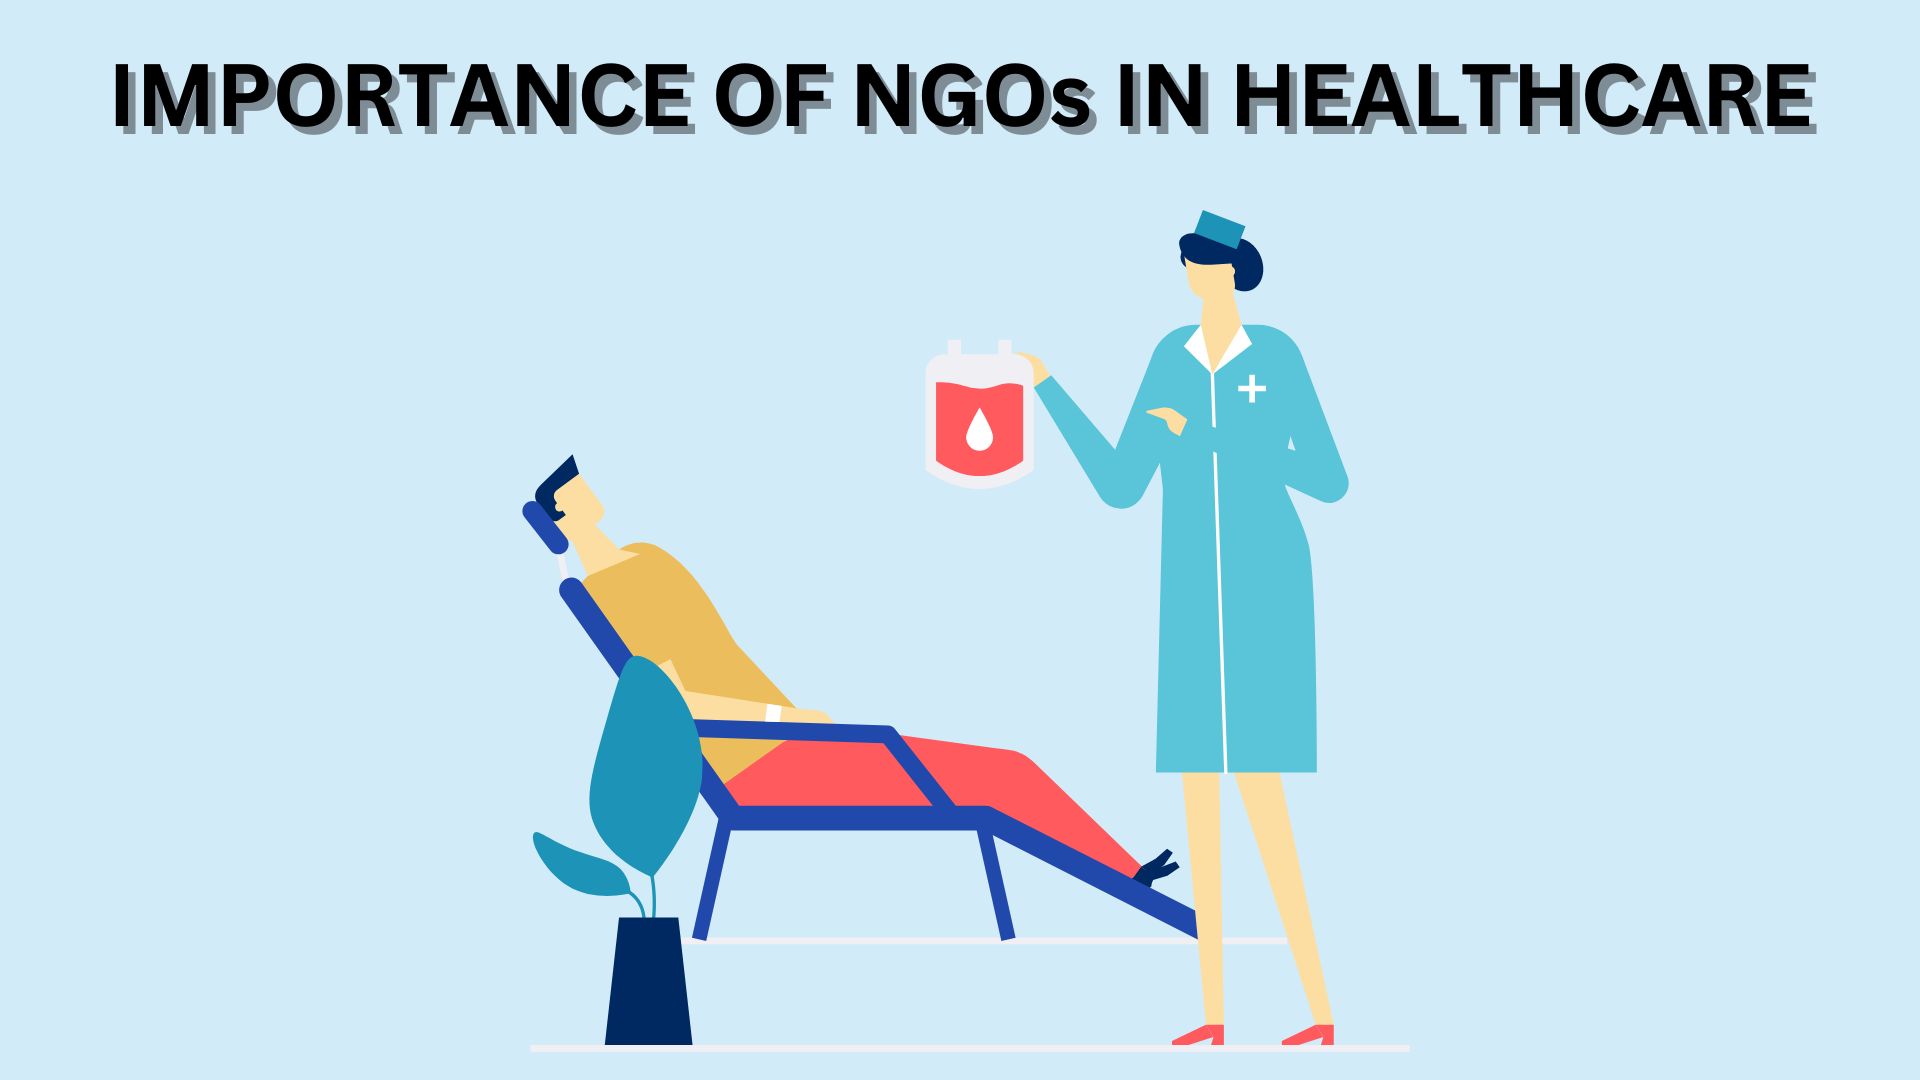 IMPORTANCE OF NGOs IN HEALTHCARE